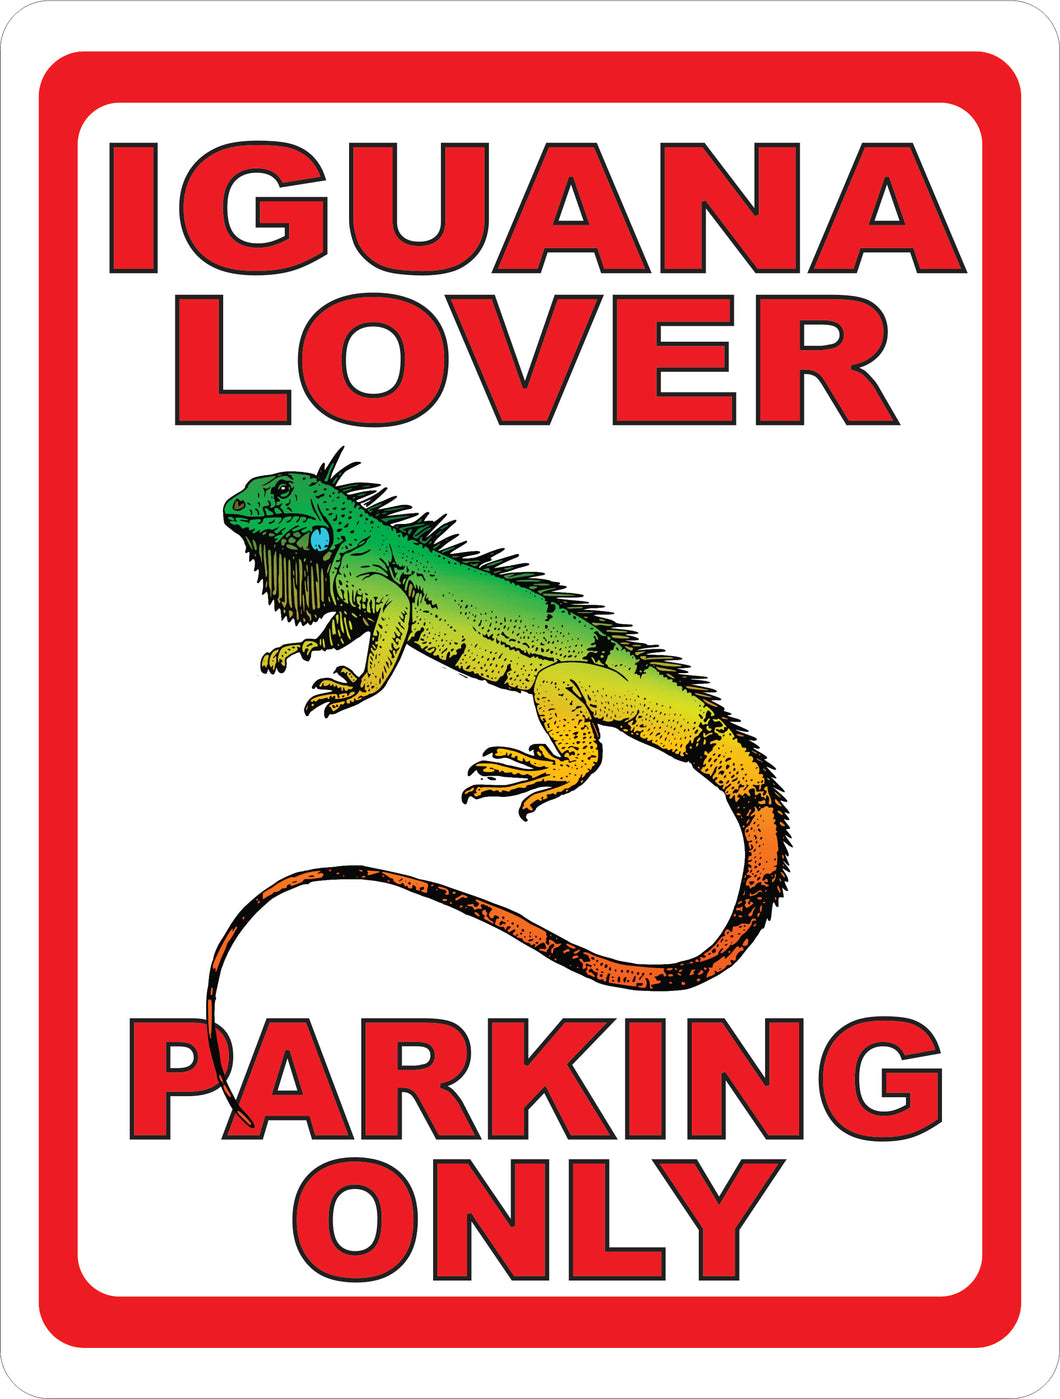 Iguana Lover Gift Idea Sign by Sala Graphics